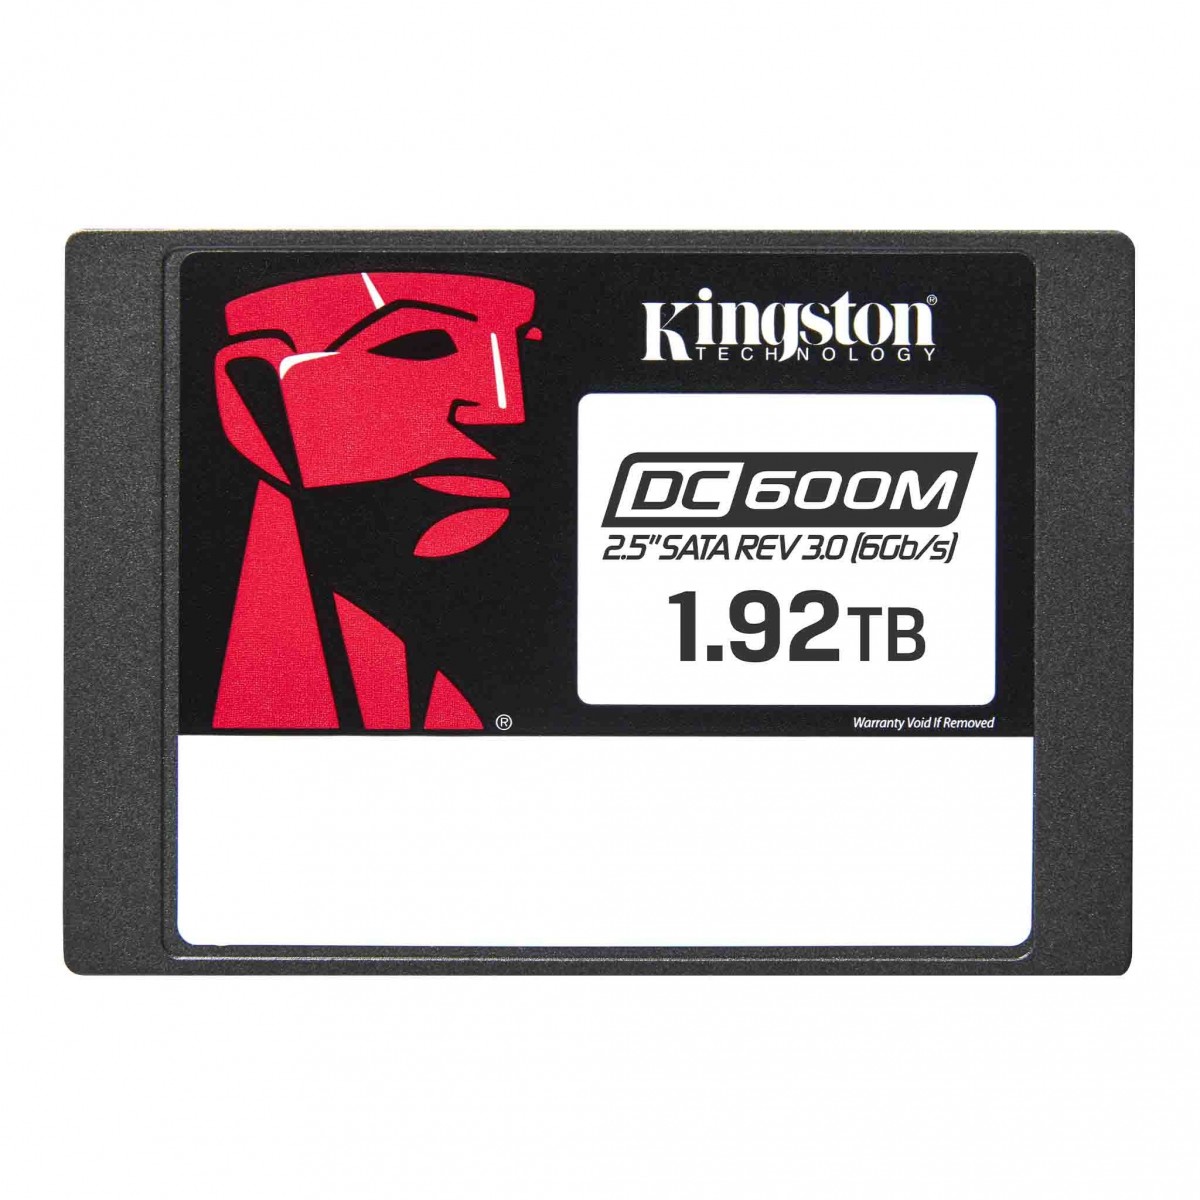 Kingston 1.92TB DC600M 2.5inch SATA3 SSD - Solid State Disk - 2.5